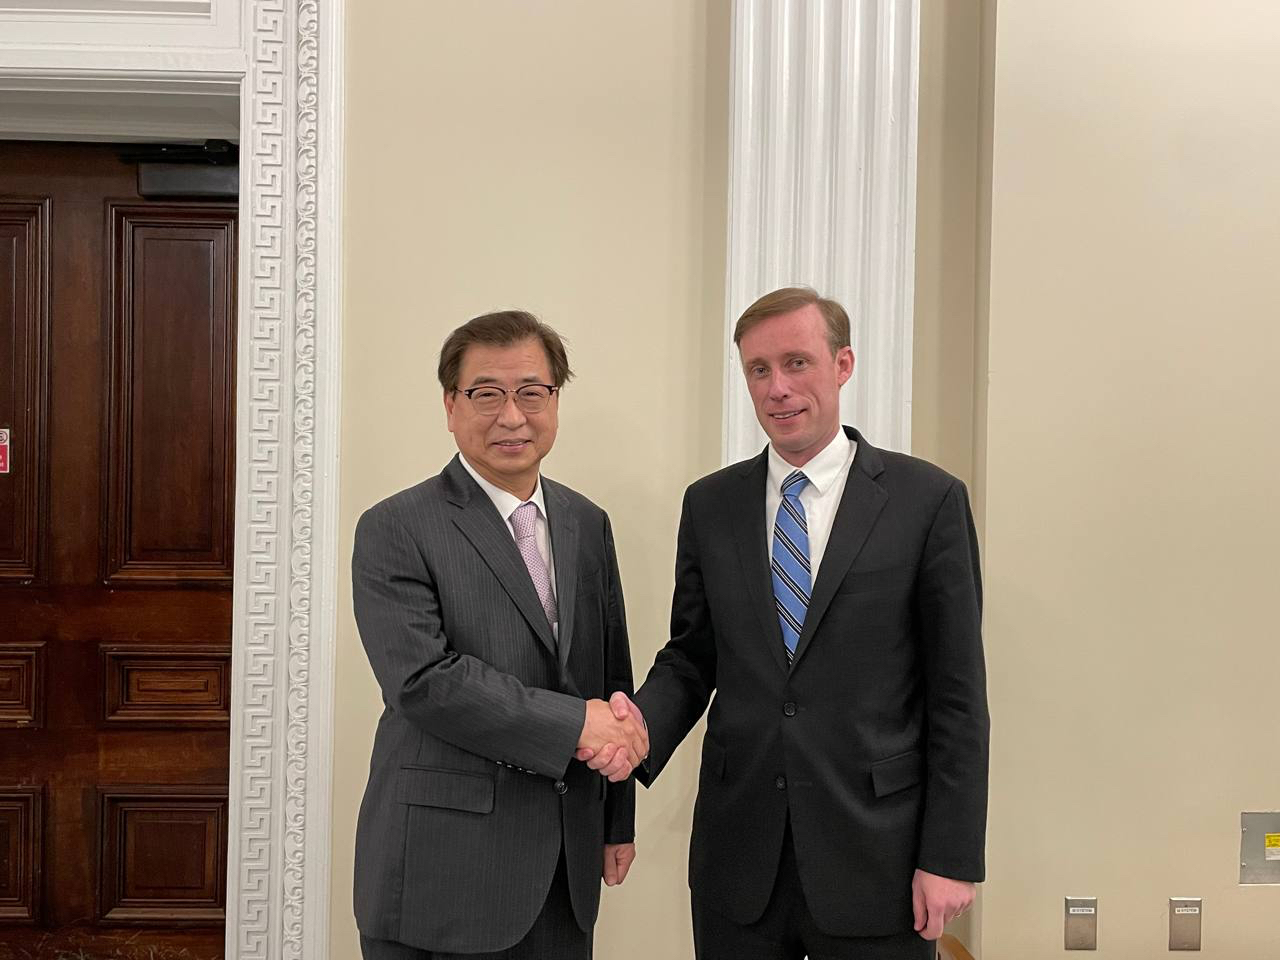 Suh Hoon, South Korea’s director of national security at Cheong Wa Dae, shakes hands with his US counterpart, Jake Sullivan, in Washington on Tuesday. (Yonhap)